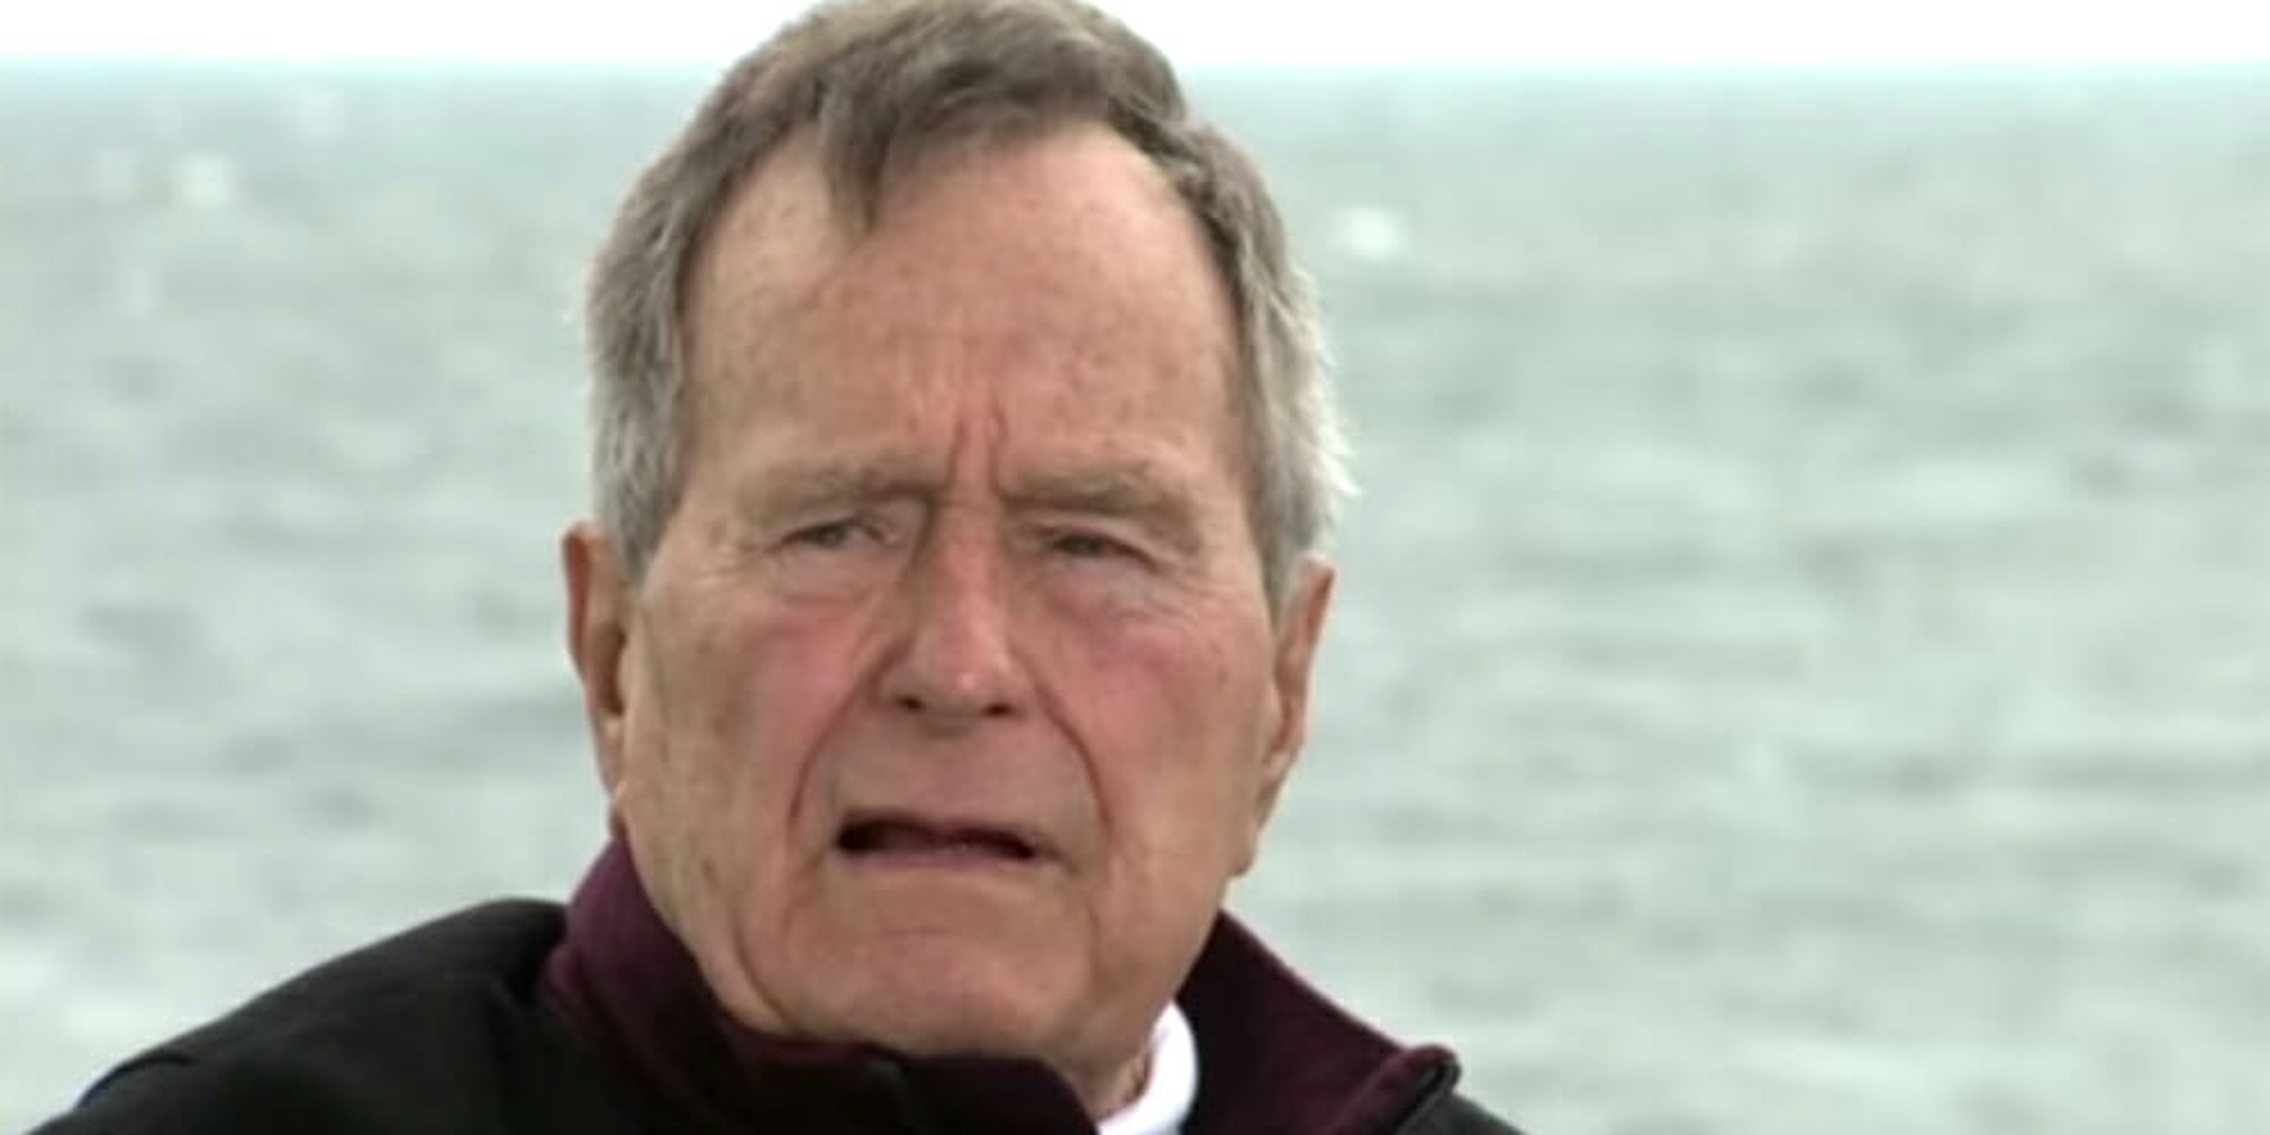 Former President George H.W. Bush has reportedly been hospitalized.